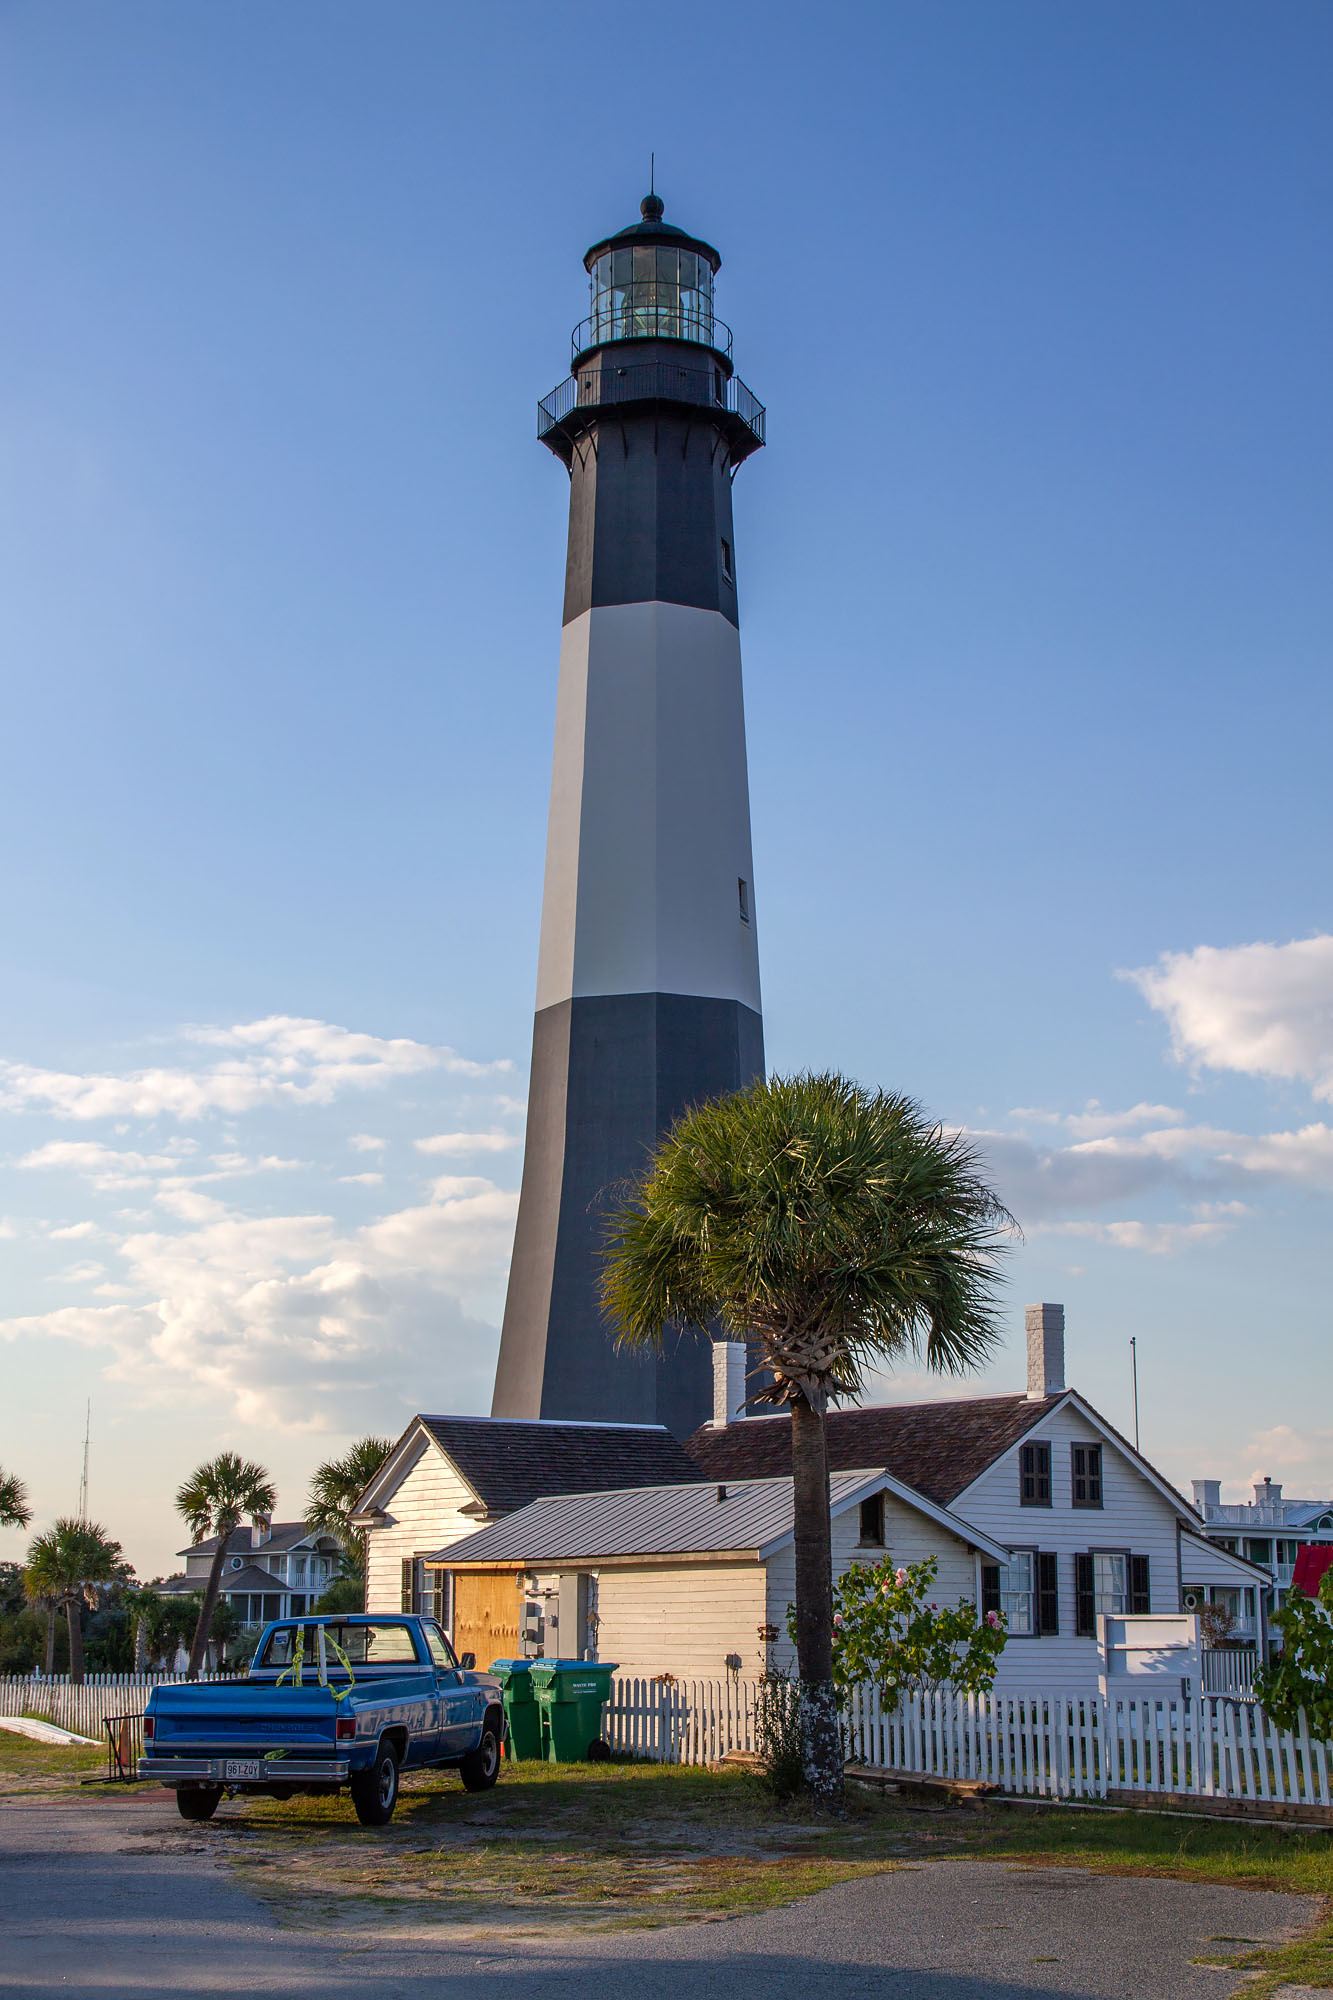 Tybee Island Lighthouse with truck